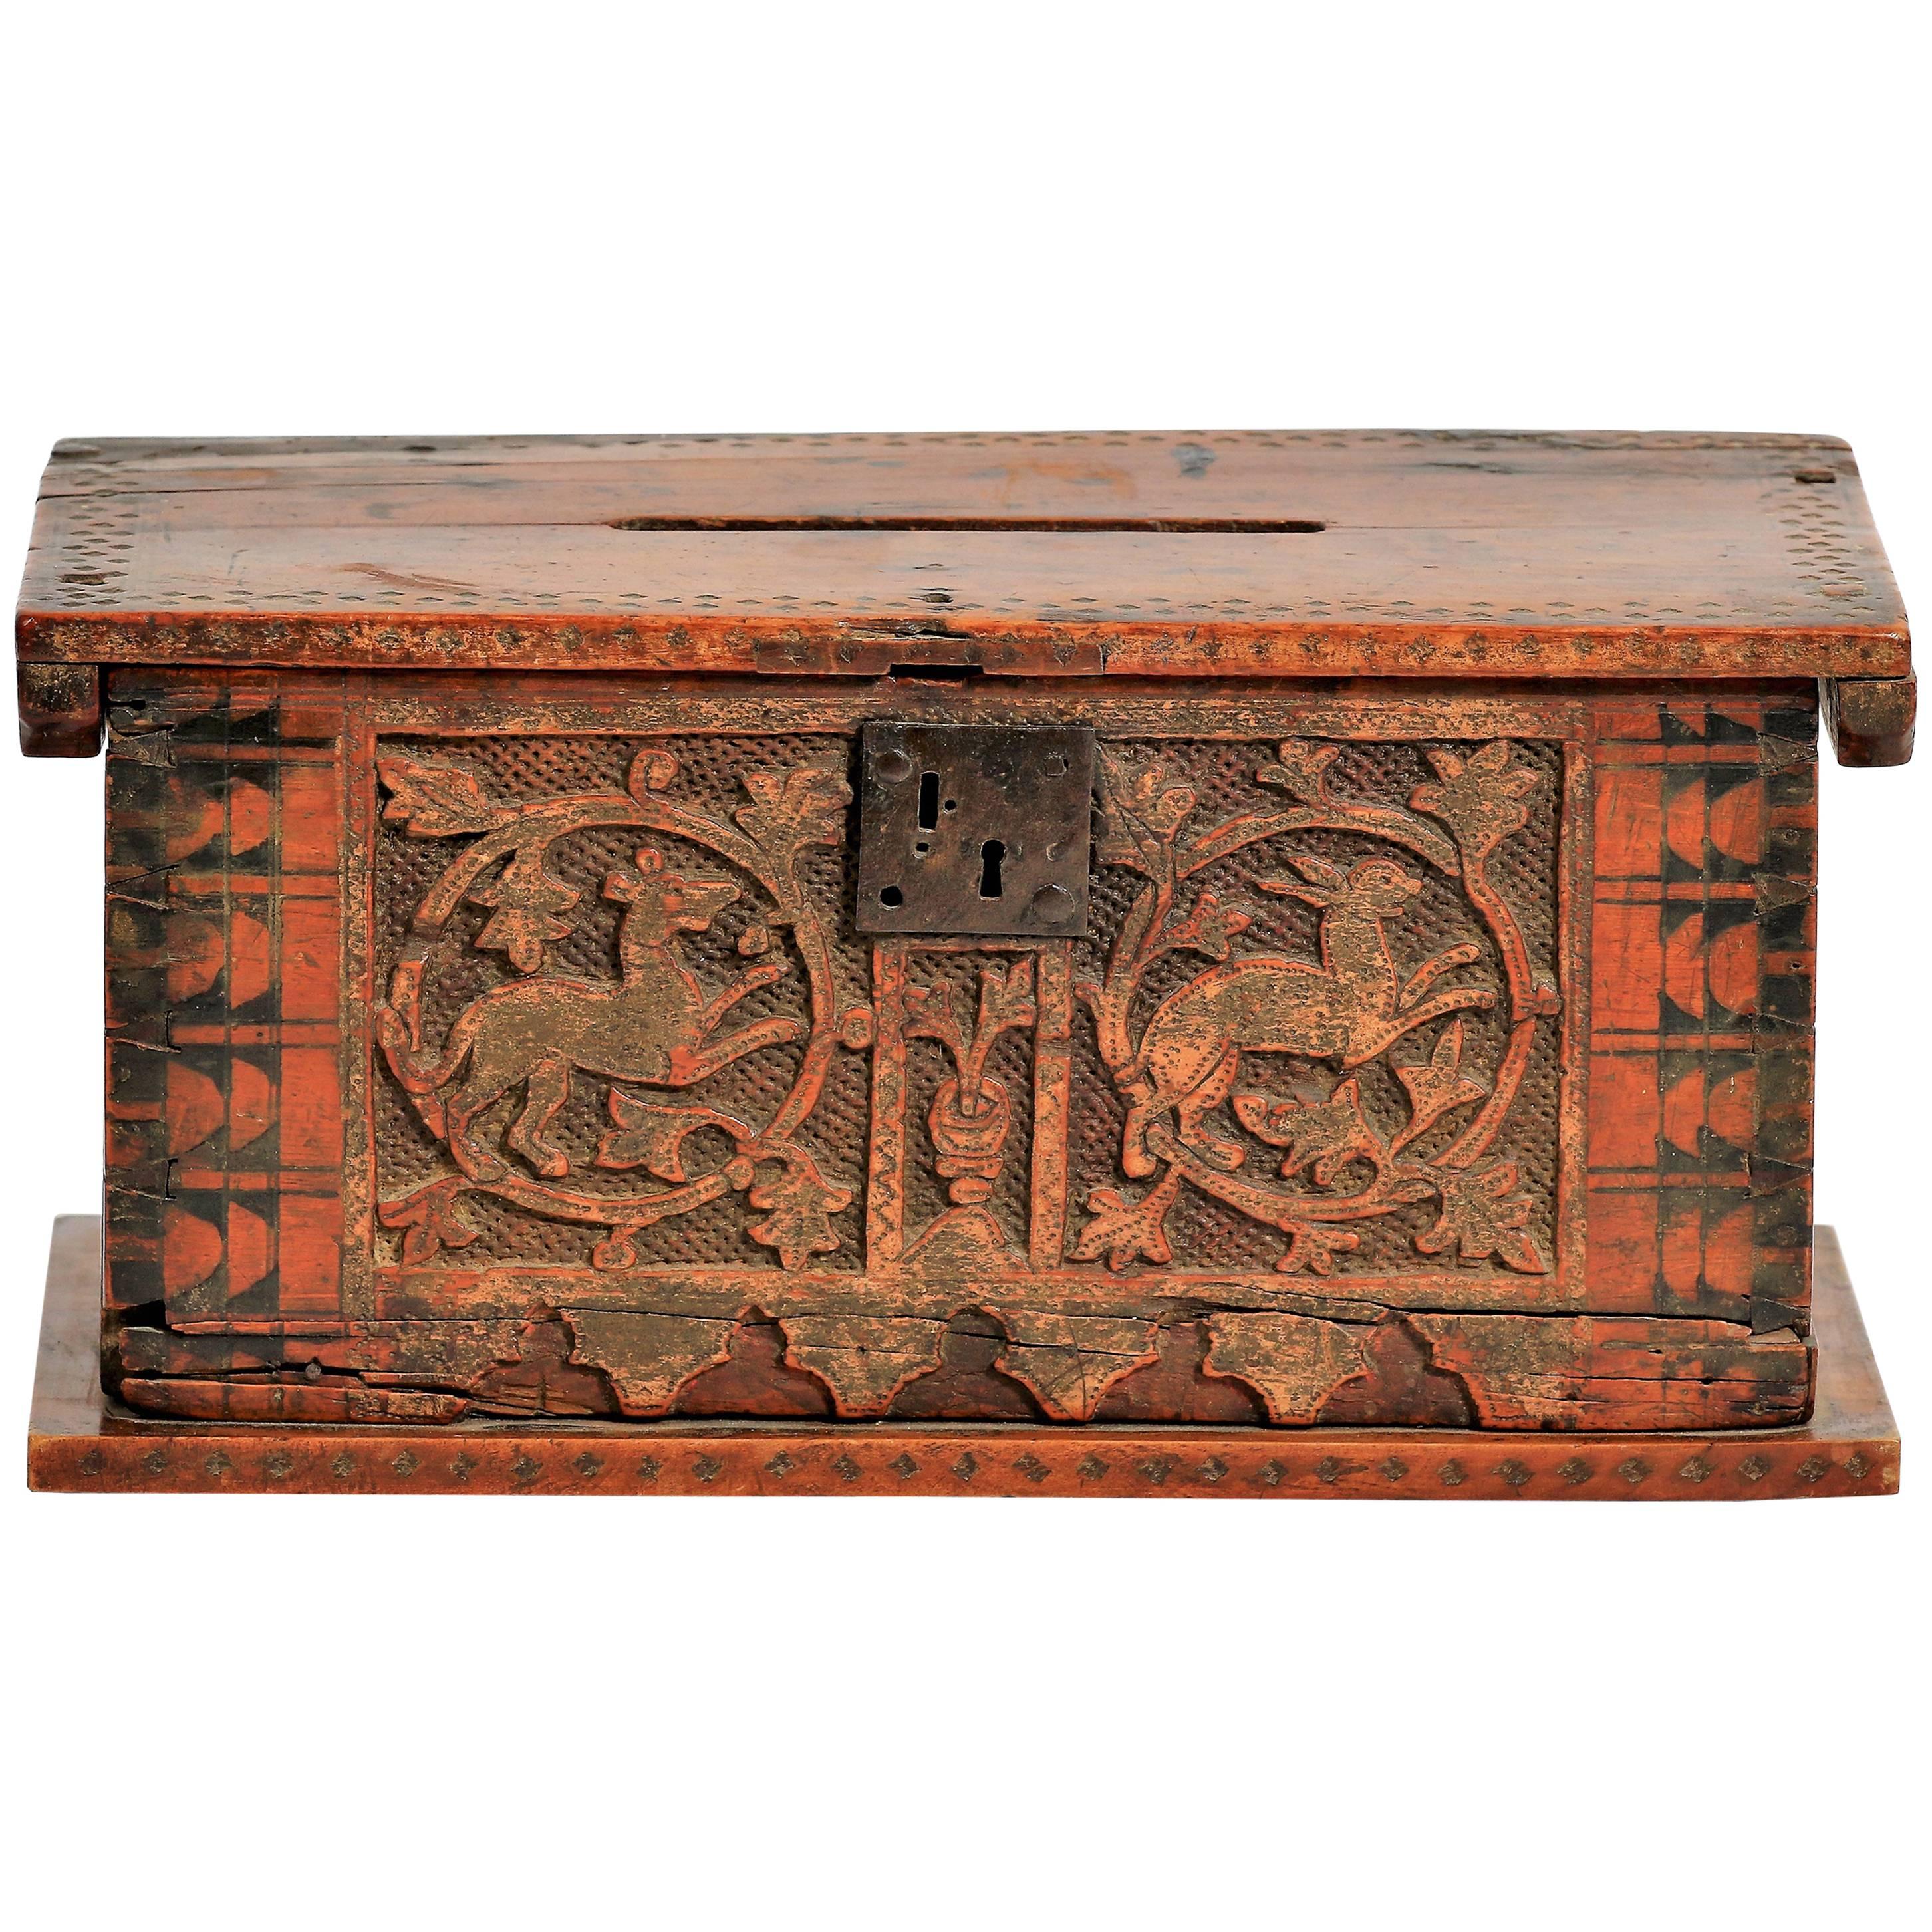 Very Rare Casket Minnekästchen or Box, Germany or Italy, 15th Century For Sale